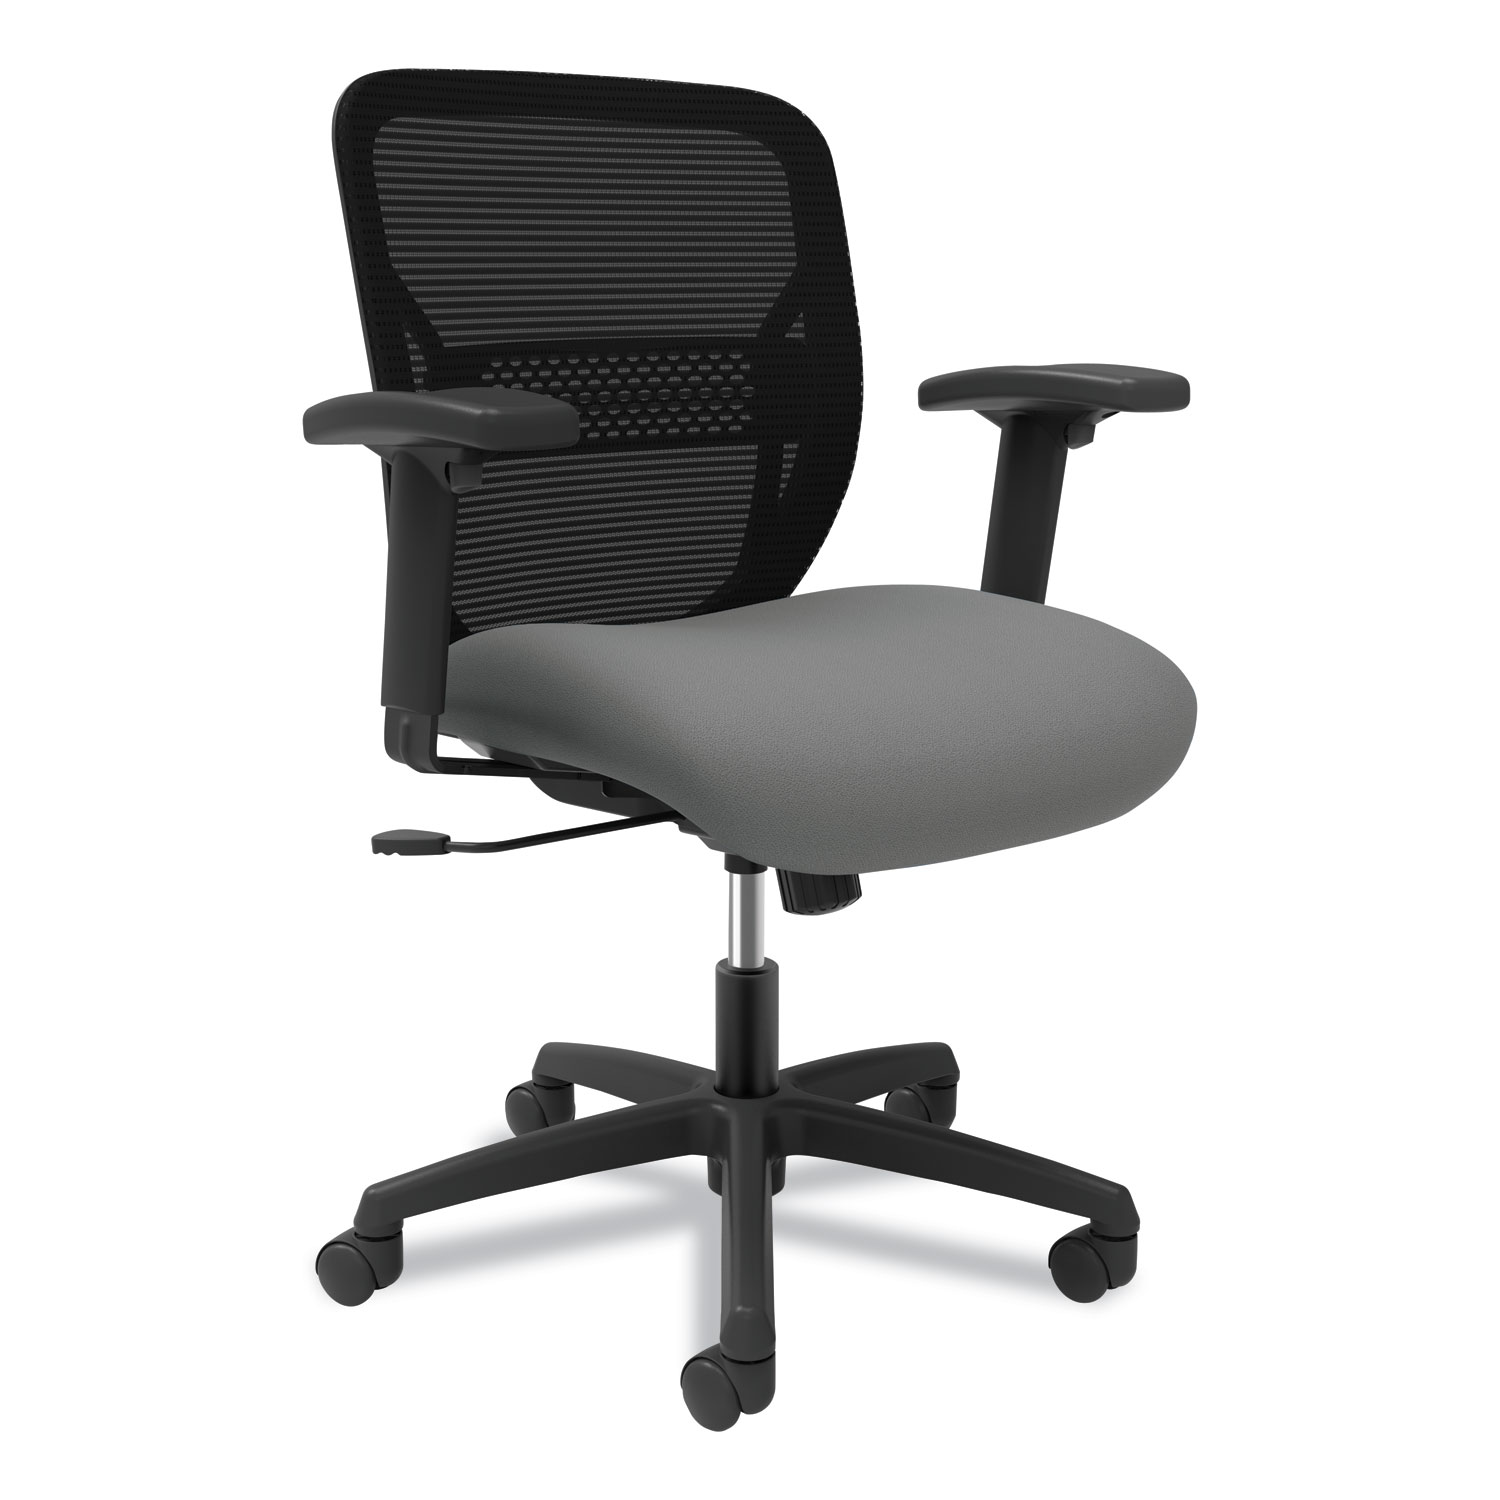  HON HONGTHMZ1CU22 Gateway Mid-Back Task Chair with Arms, Supports up to 250 lbs, Frost Seat, Black Back, Black Base (HONGTHMZ1CU22) 